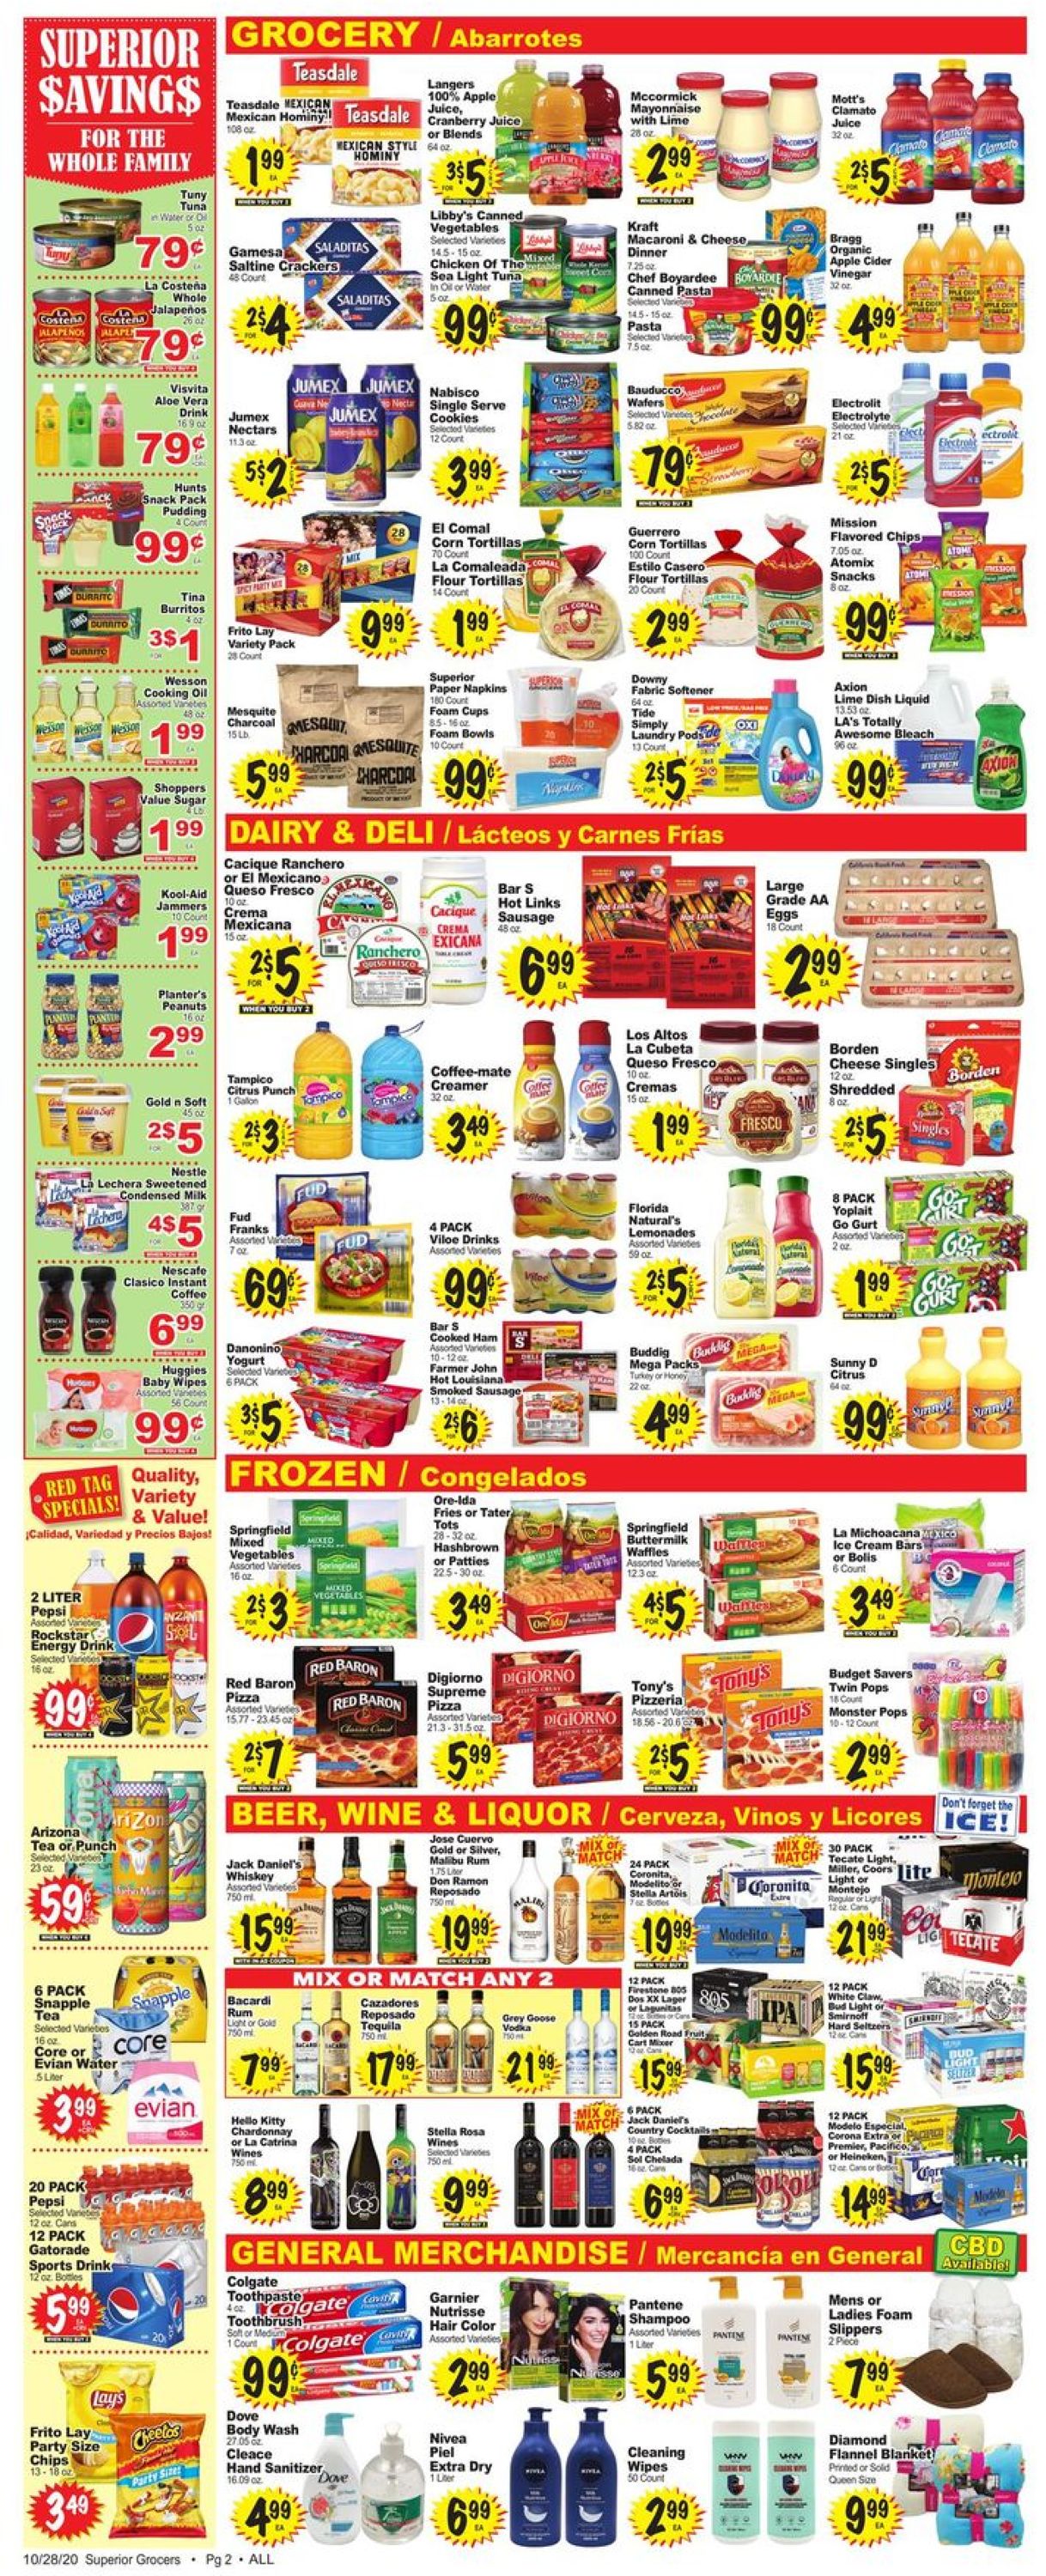 Catalogue Superior Grocers from 10/28/2020